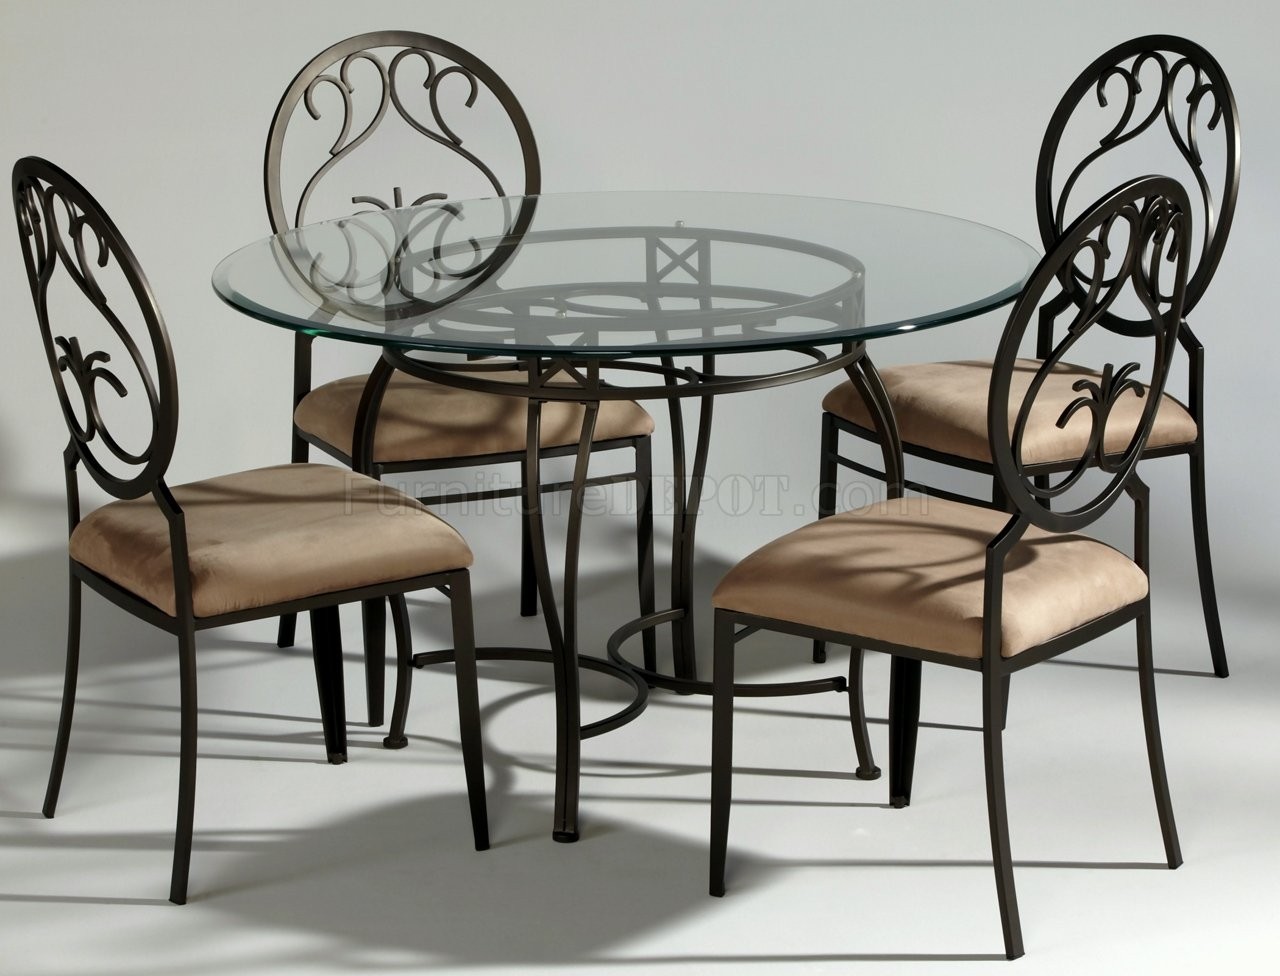 Wrought iron dining chairs